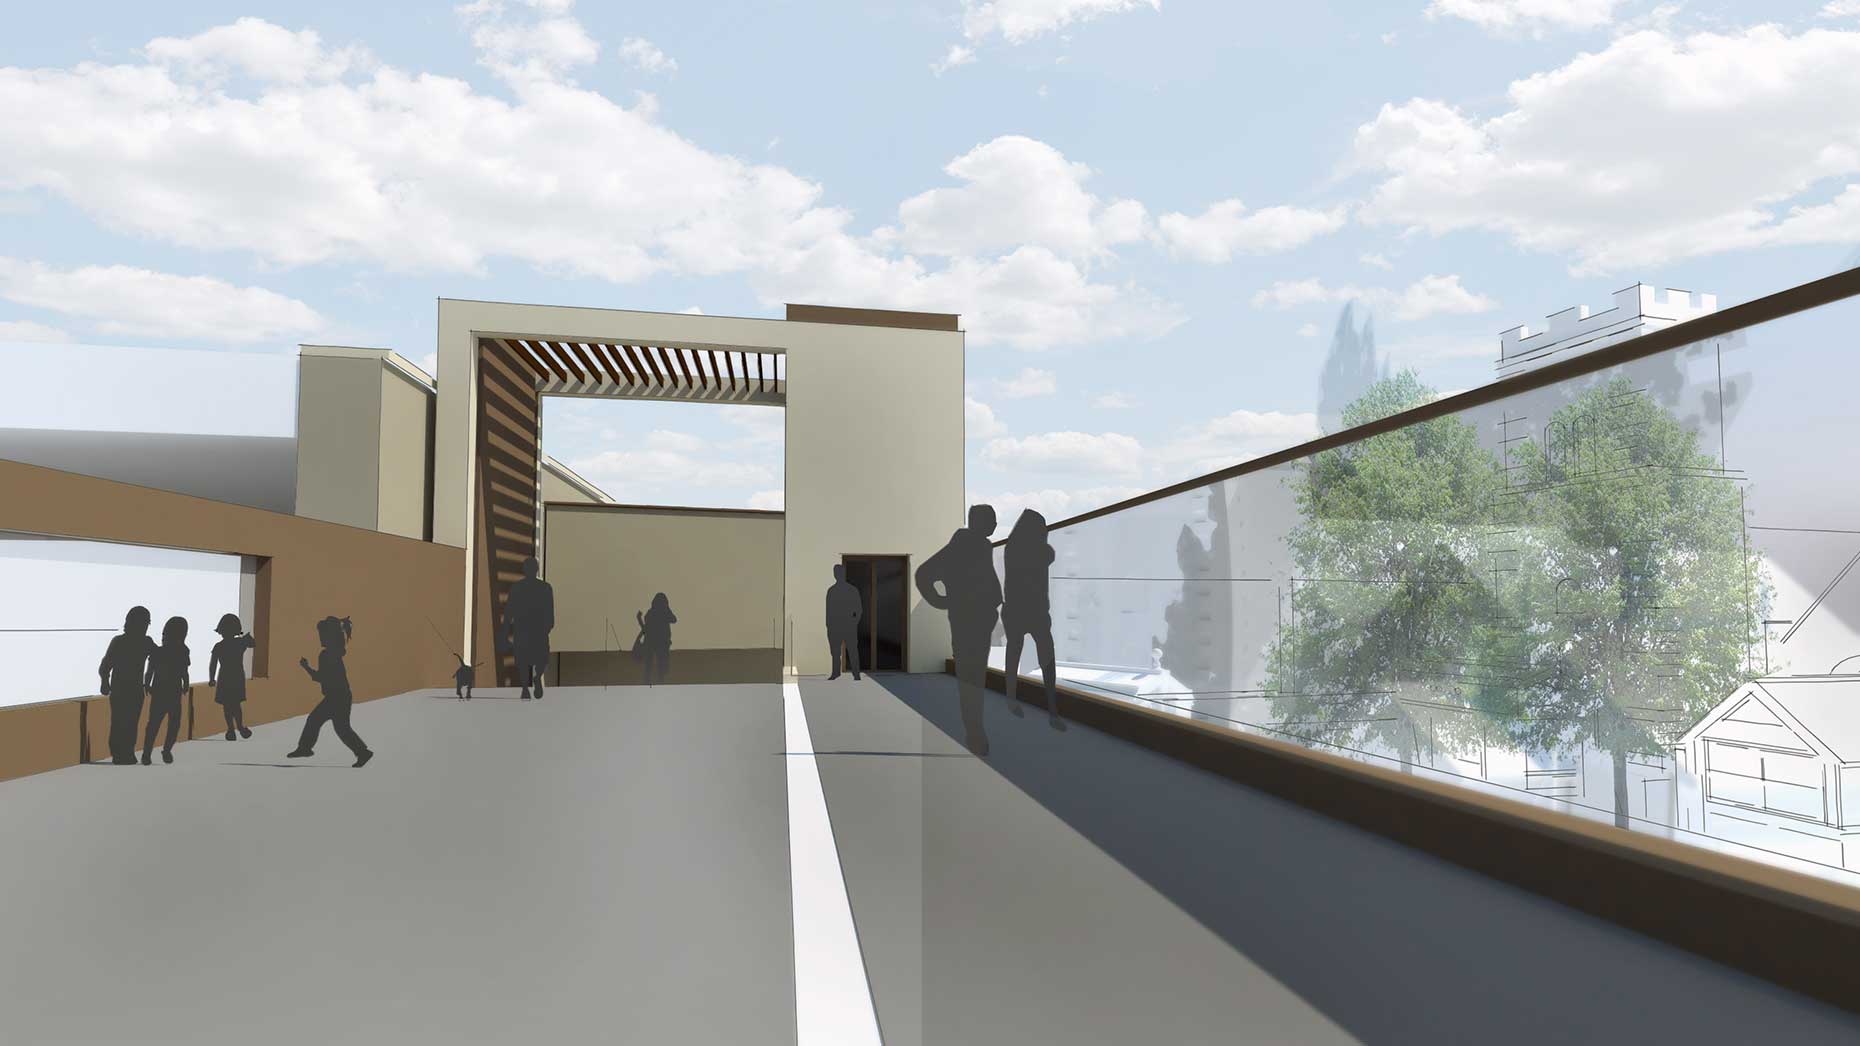 The footbridge would help reduce crowds waiting at the High Street level crossing in Lincoln.